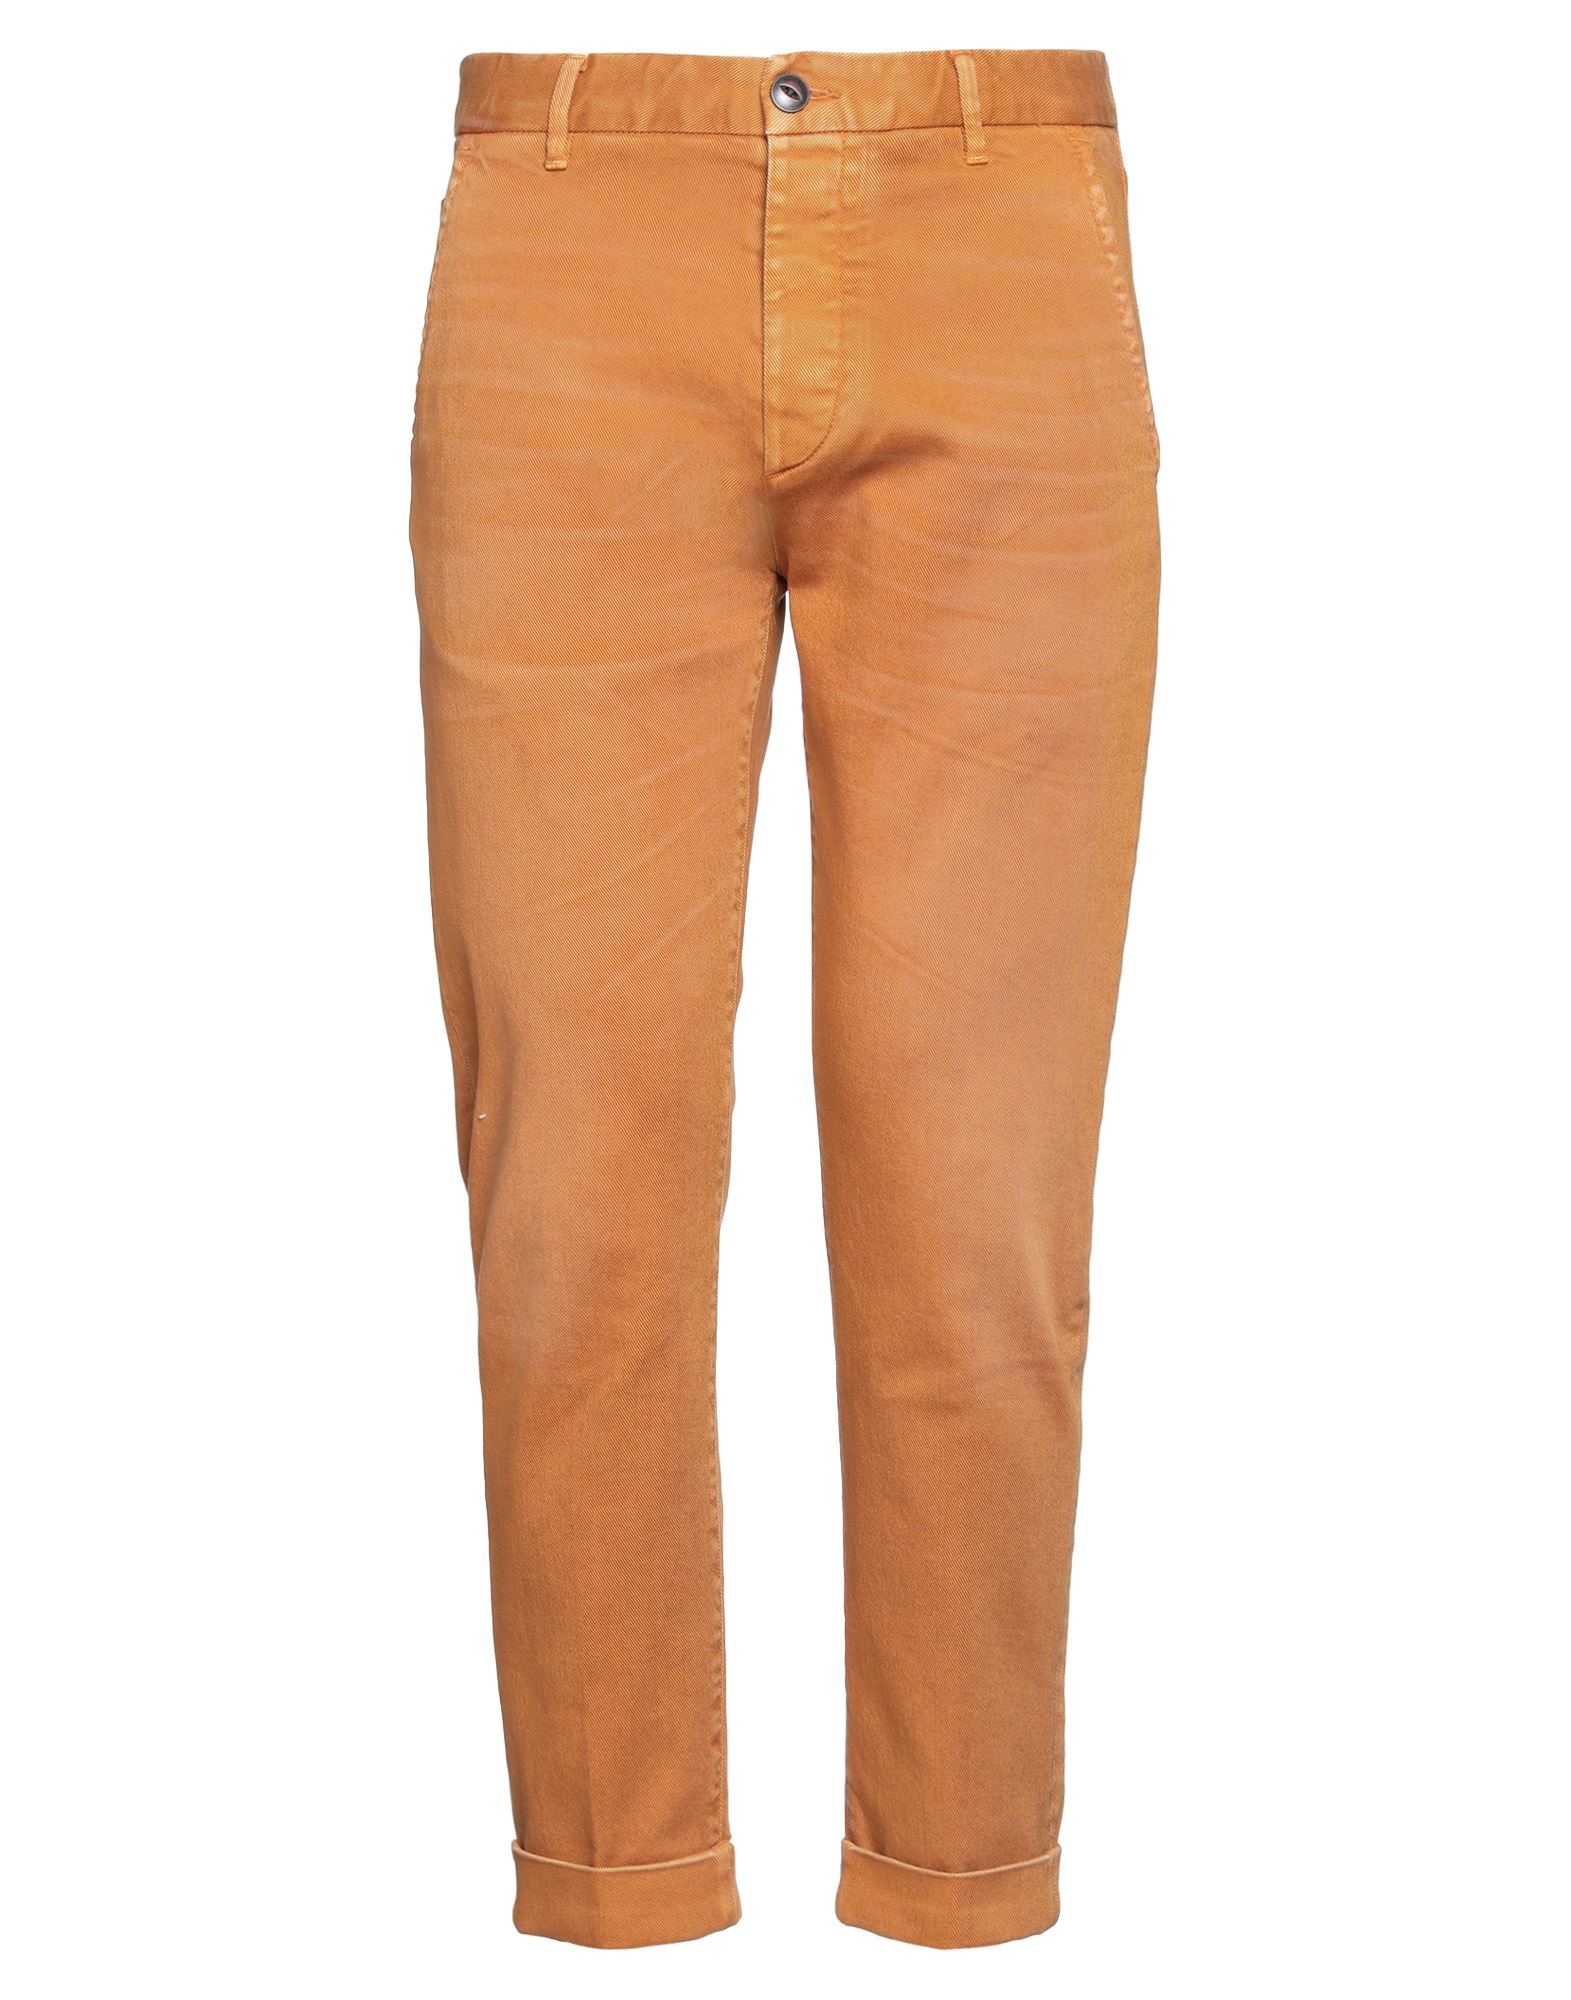 Care Label Pants In Brown